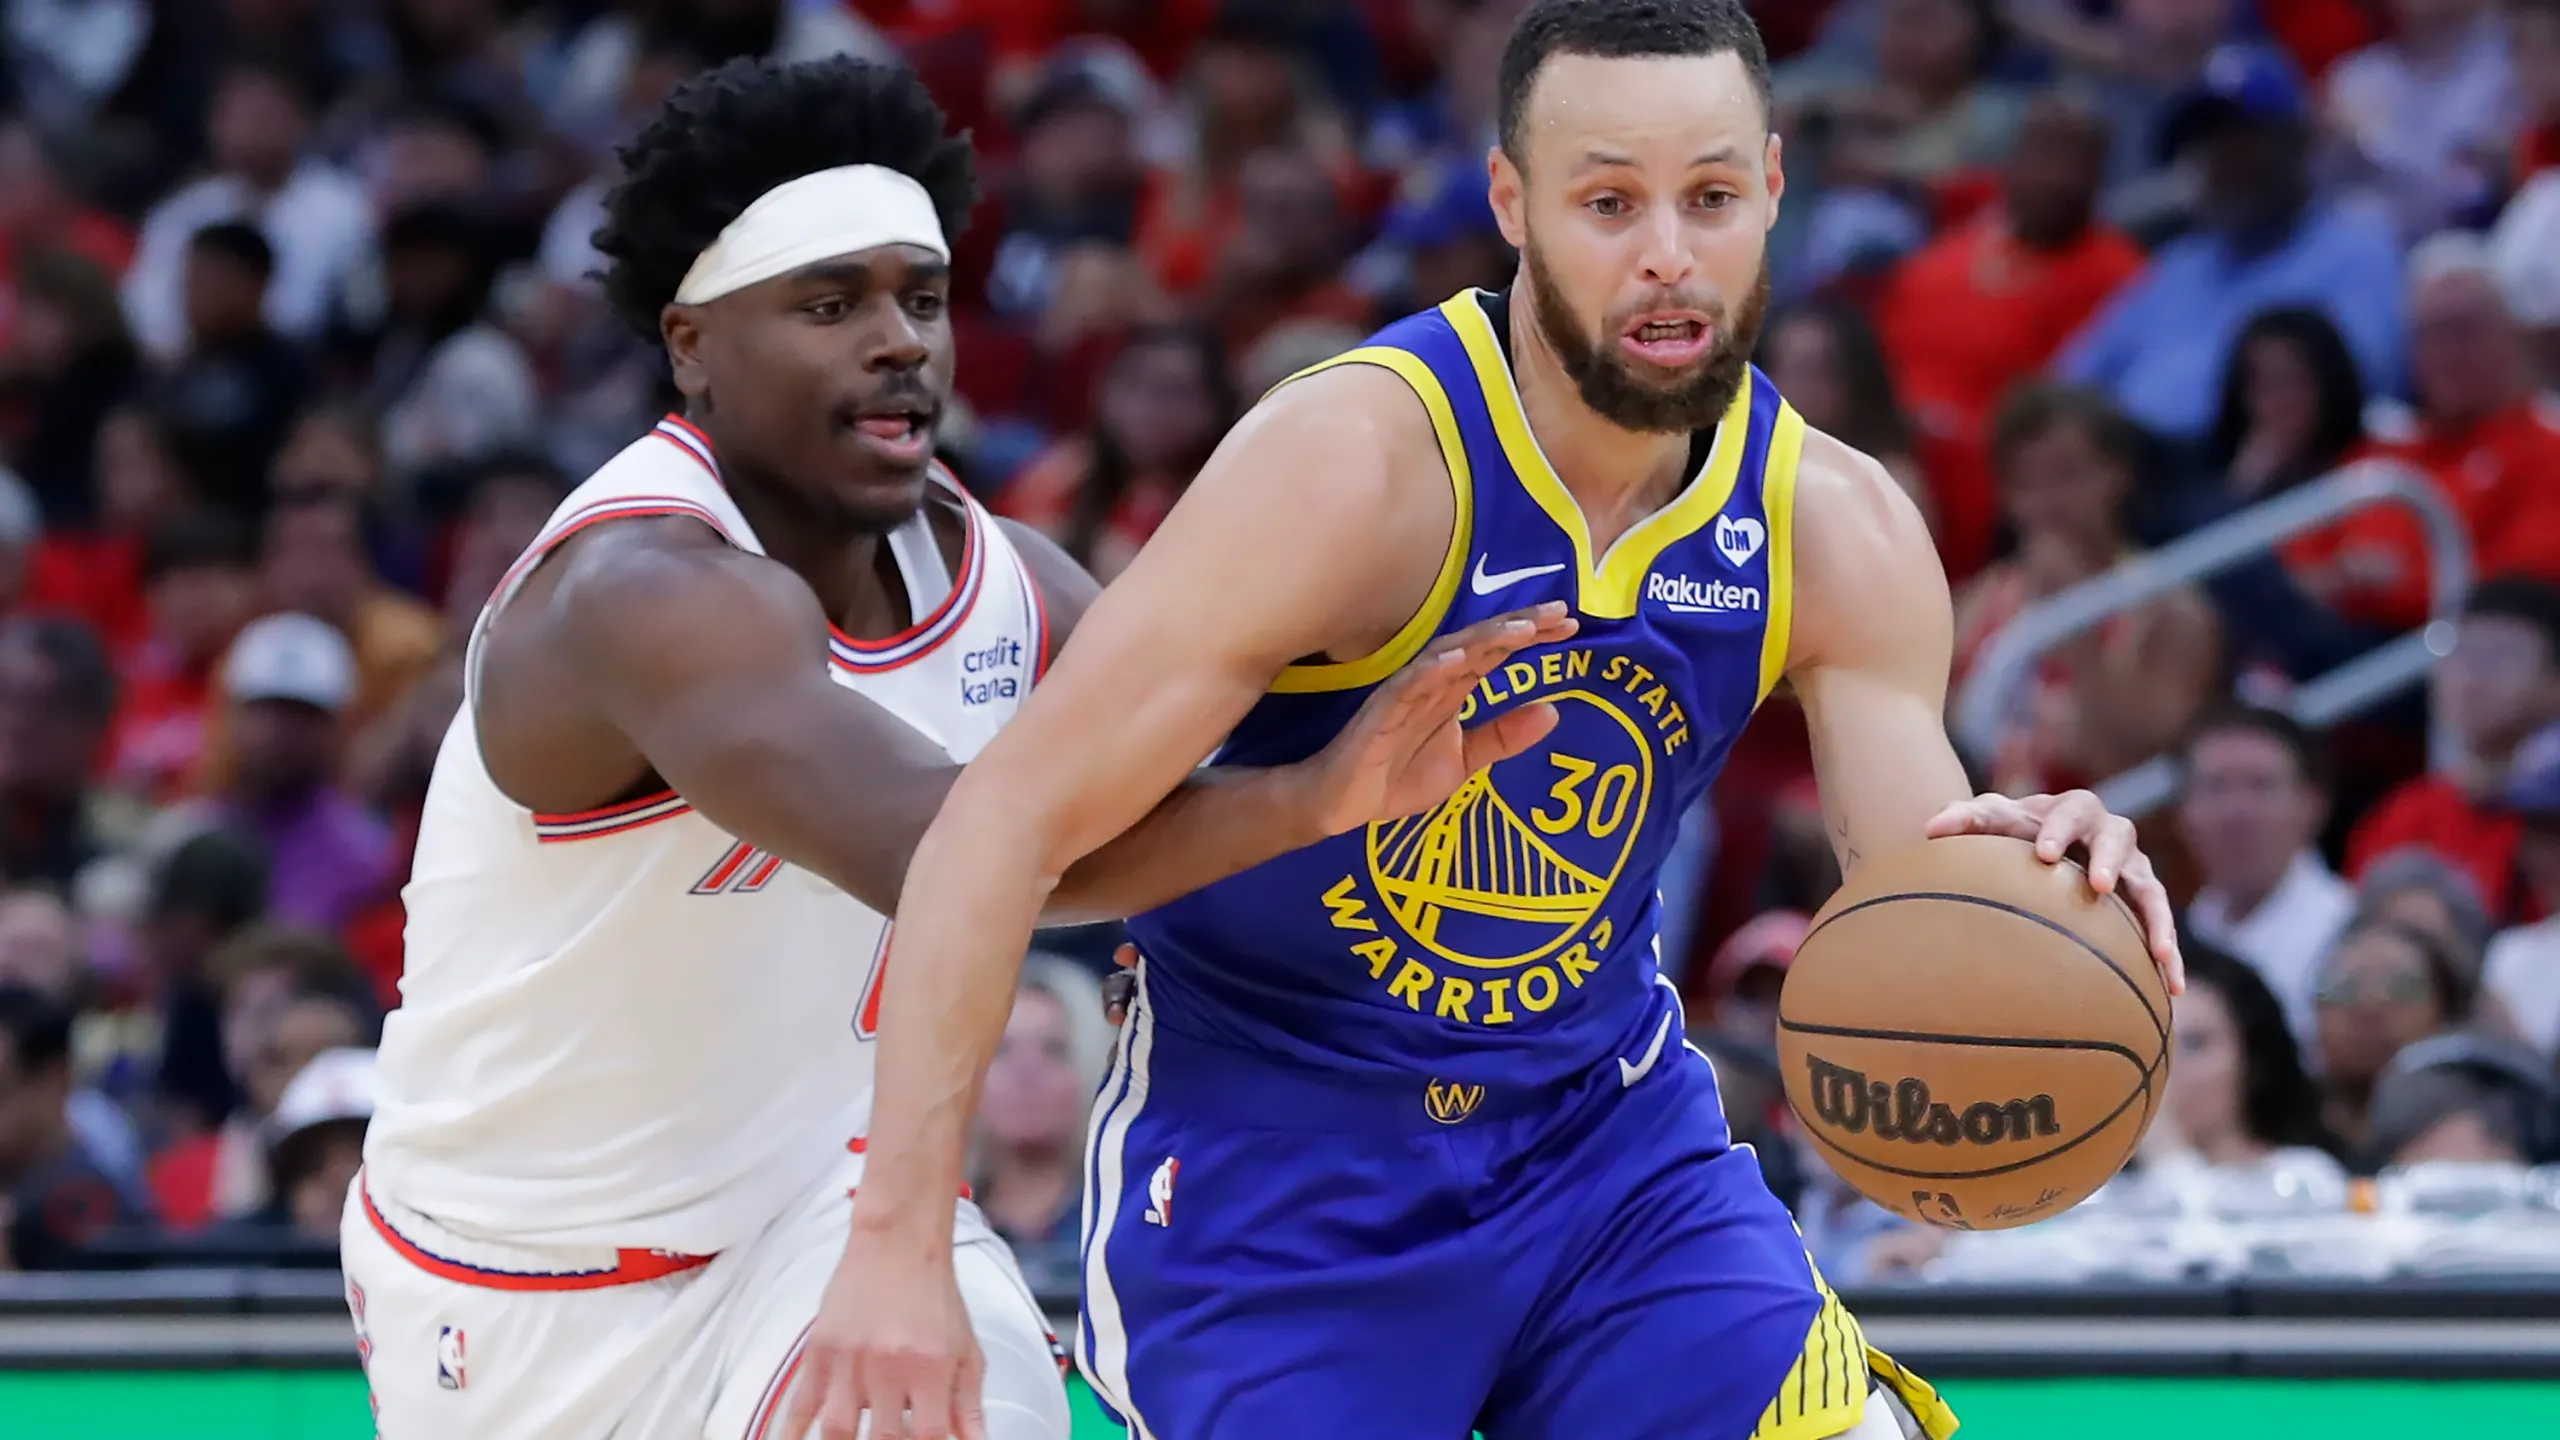 Warriors' Thompson Criticizes Rockets' Eason After Important Victory